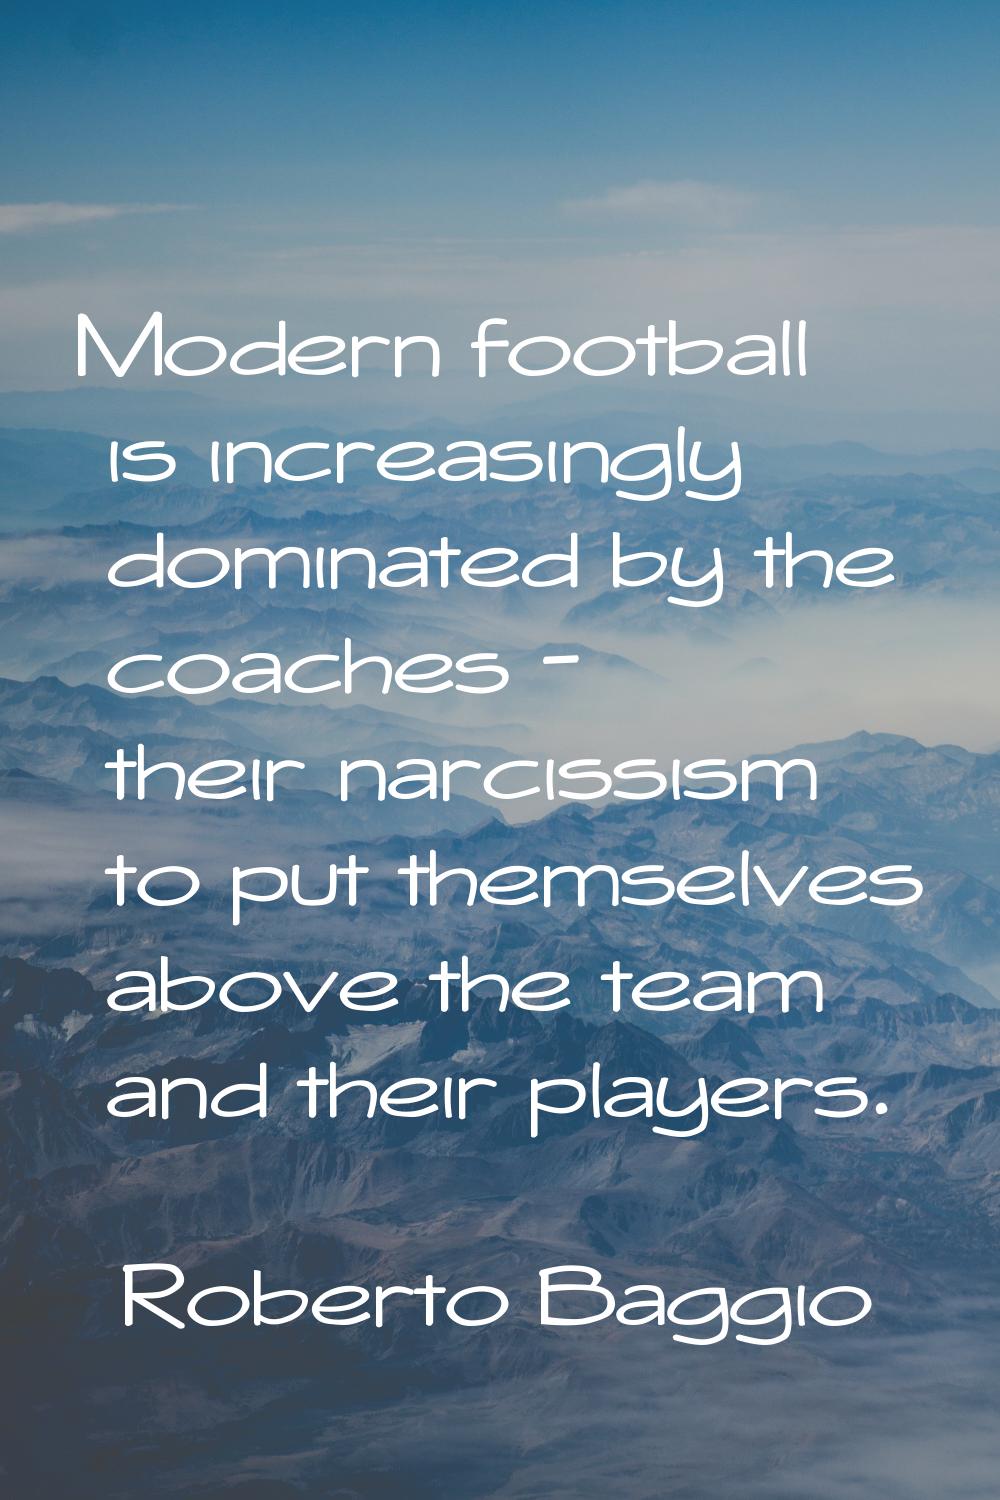 Modern football is increasingly dominated by the coaches - their narcissism to put themselves above